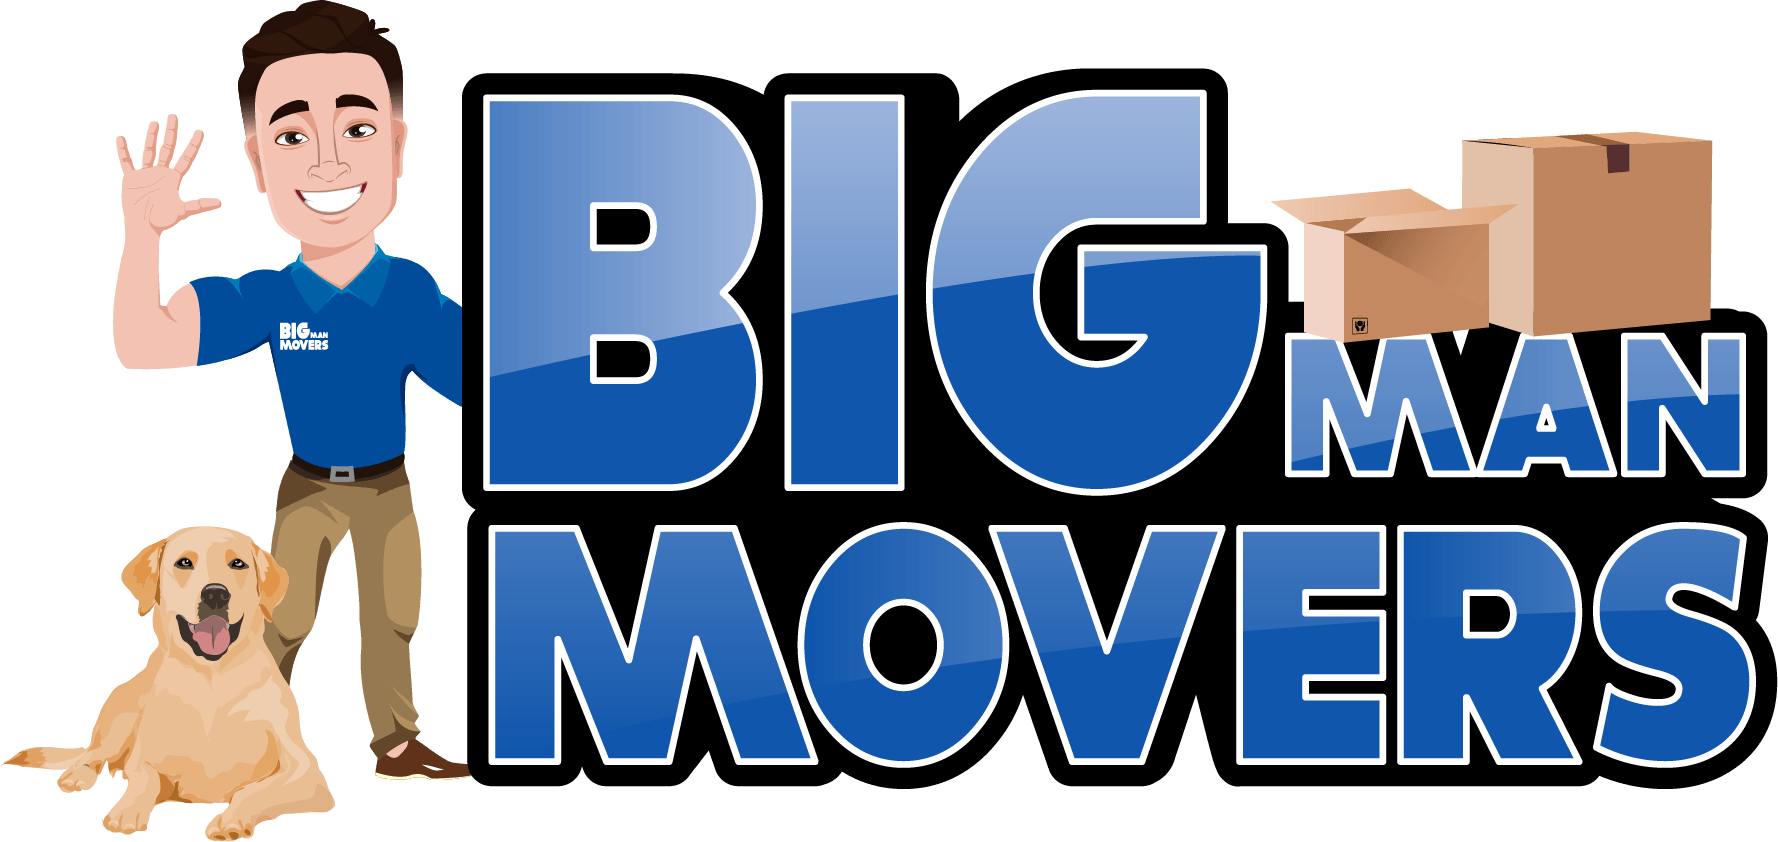 Contact Big Man Movers - Moving Company Orlando, Local Movers